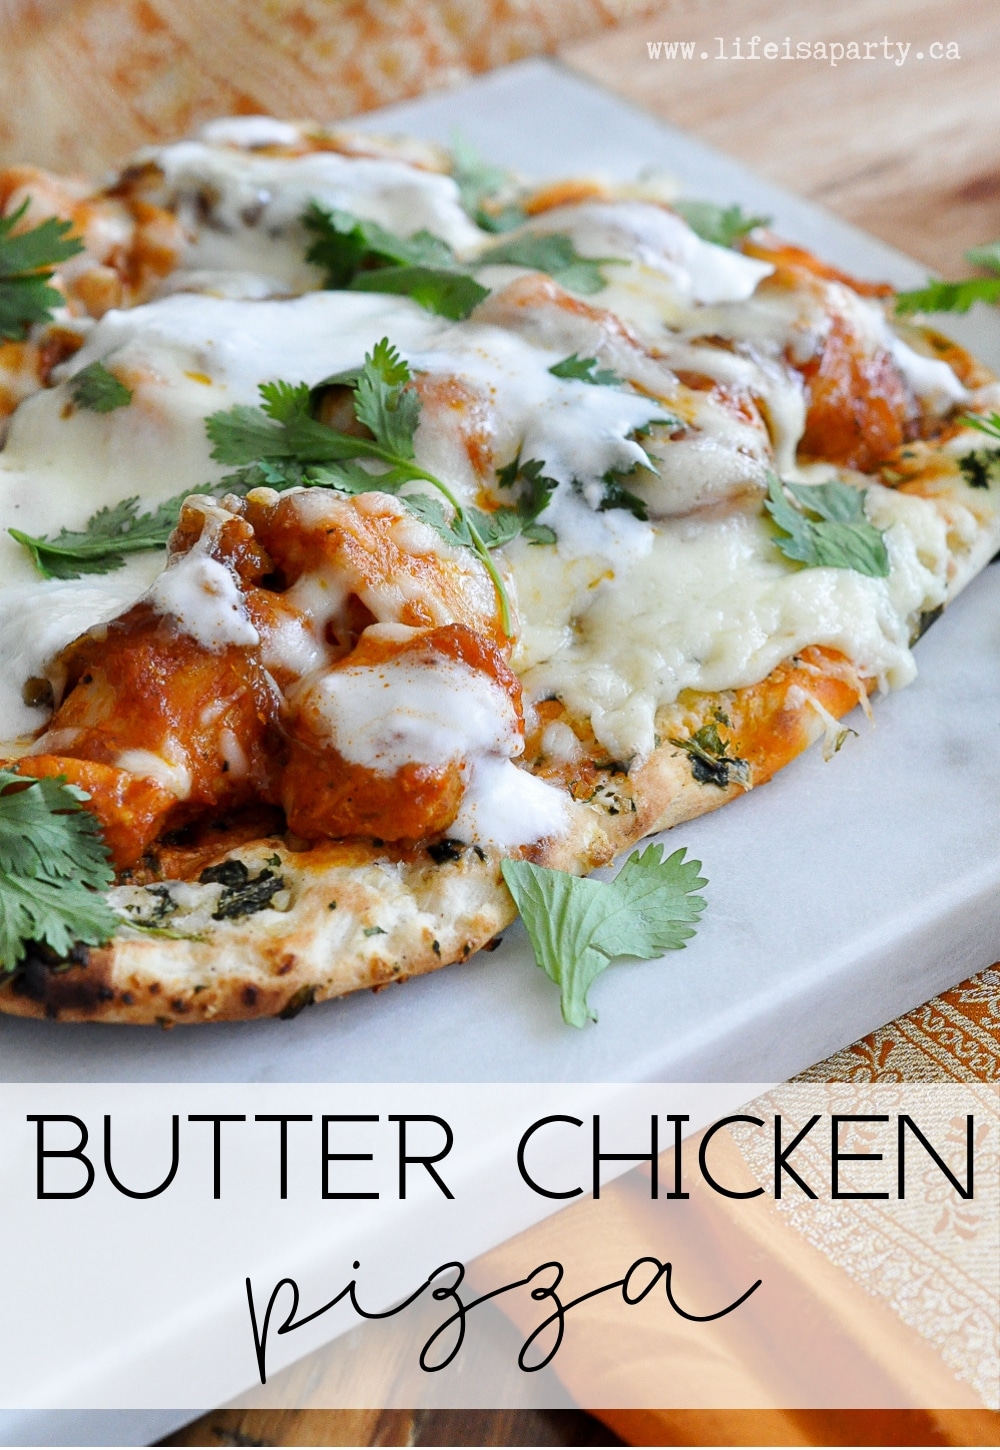 Butter Chicken Pizza: use frozen naan bread and jarred butter chicken sauce from the grocery store, for this quick and easy butter chicken pizza recipe.